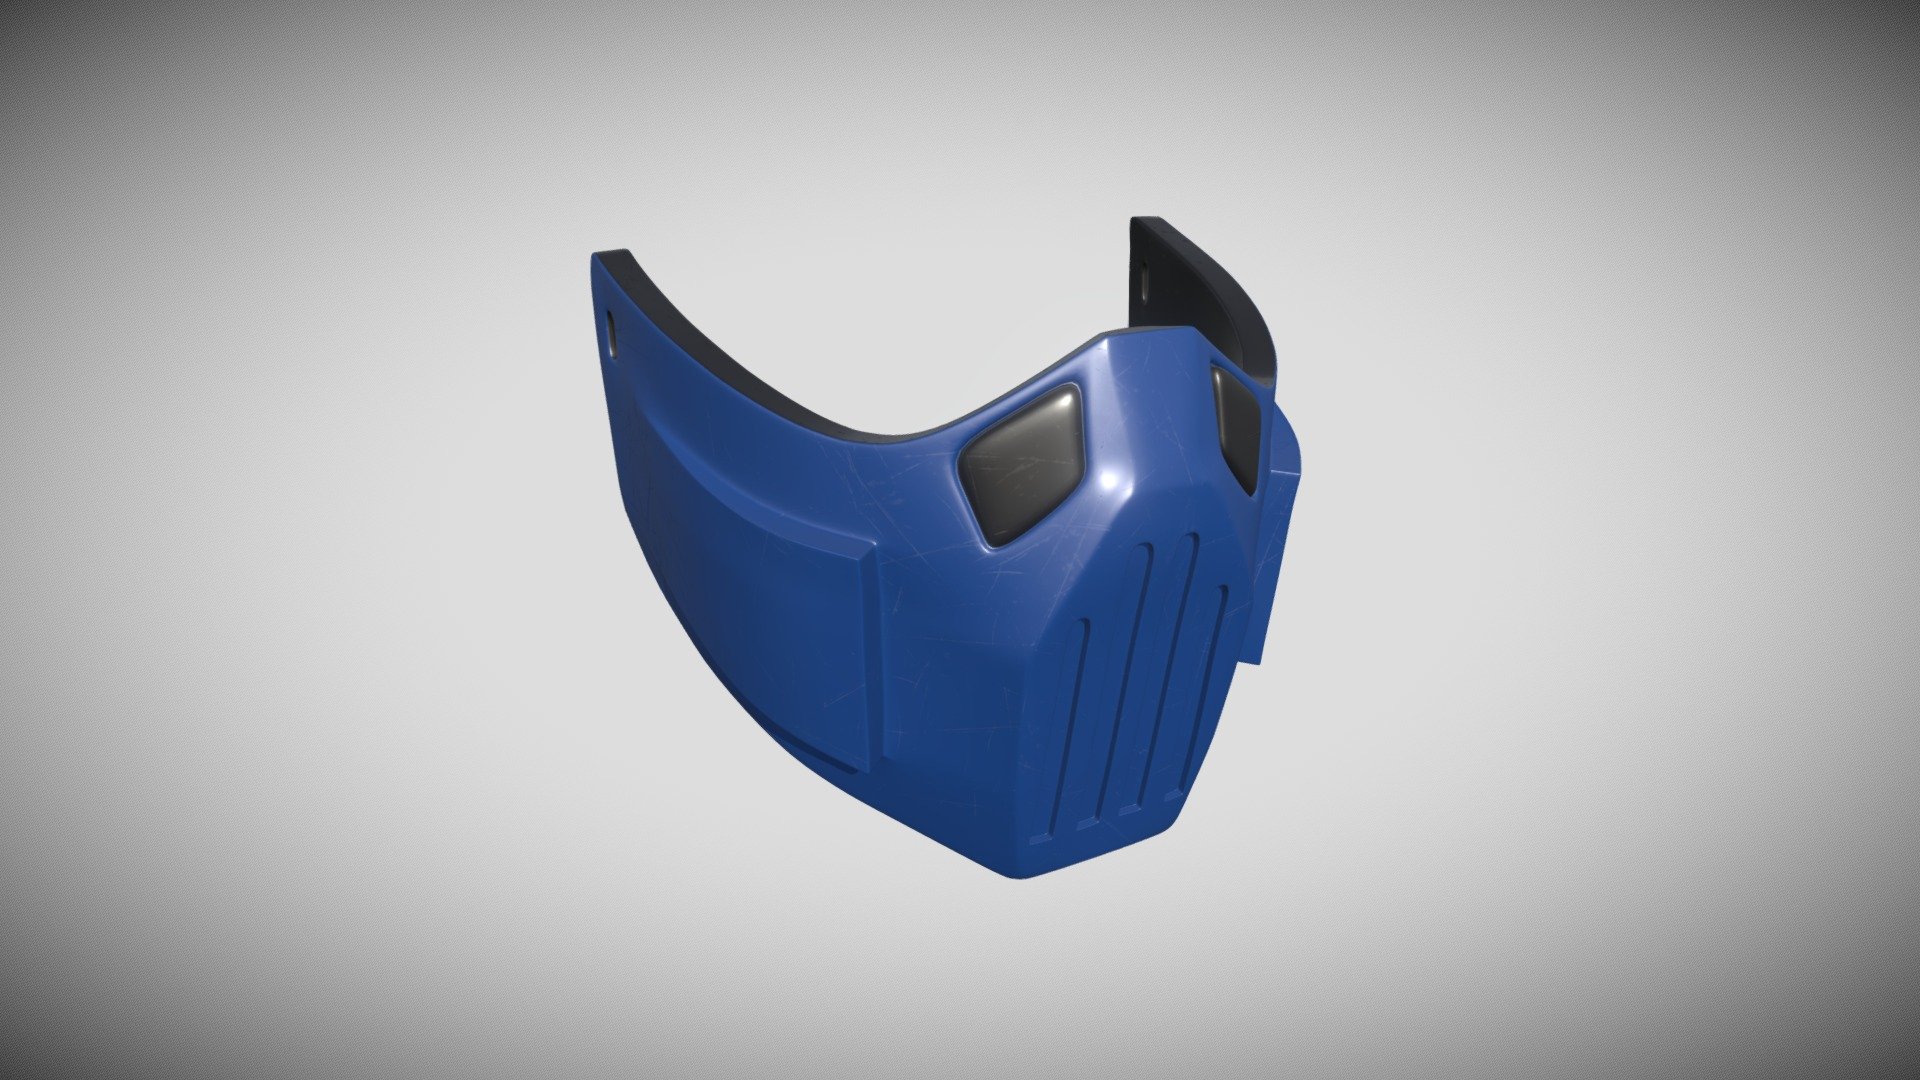 High-Poly 3D printable Sub Zero mask

If using for cosplay purposes, please make sure to scale to correct dimensions for fitting before printing.

If you're not sure how to resize, please drop me a message with the measurements you need and I'll do that free of charge (If you're nice).


156,160 Polygons in total

Textures Inlcuded:


Basecolor
Roughness

Please note - not intended or viable as protection against the spread of the COVID-19 virus 3d model